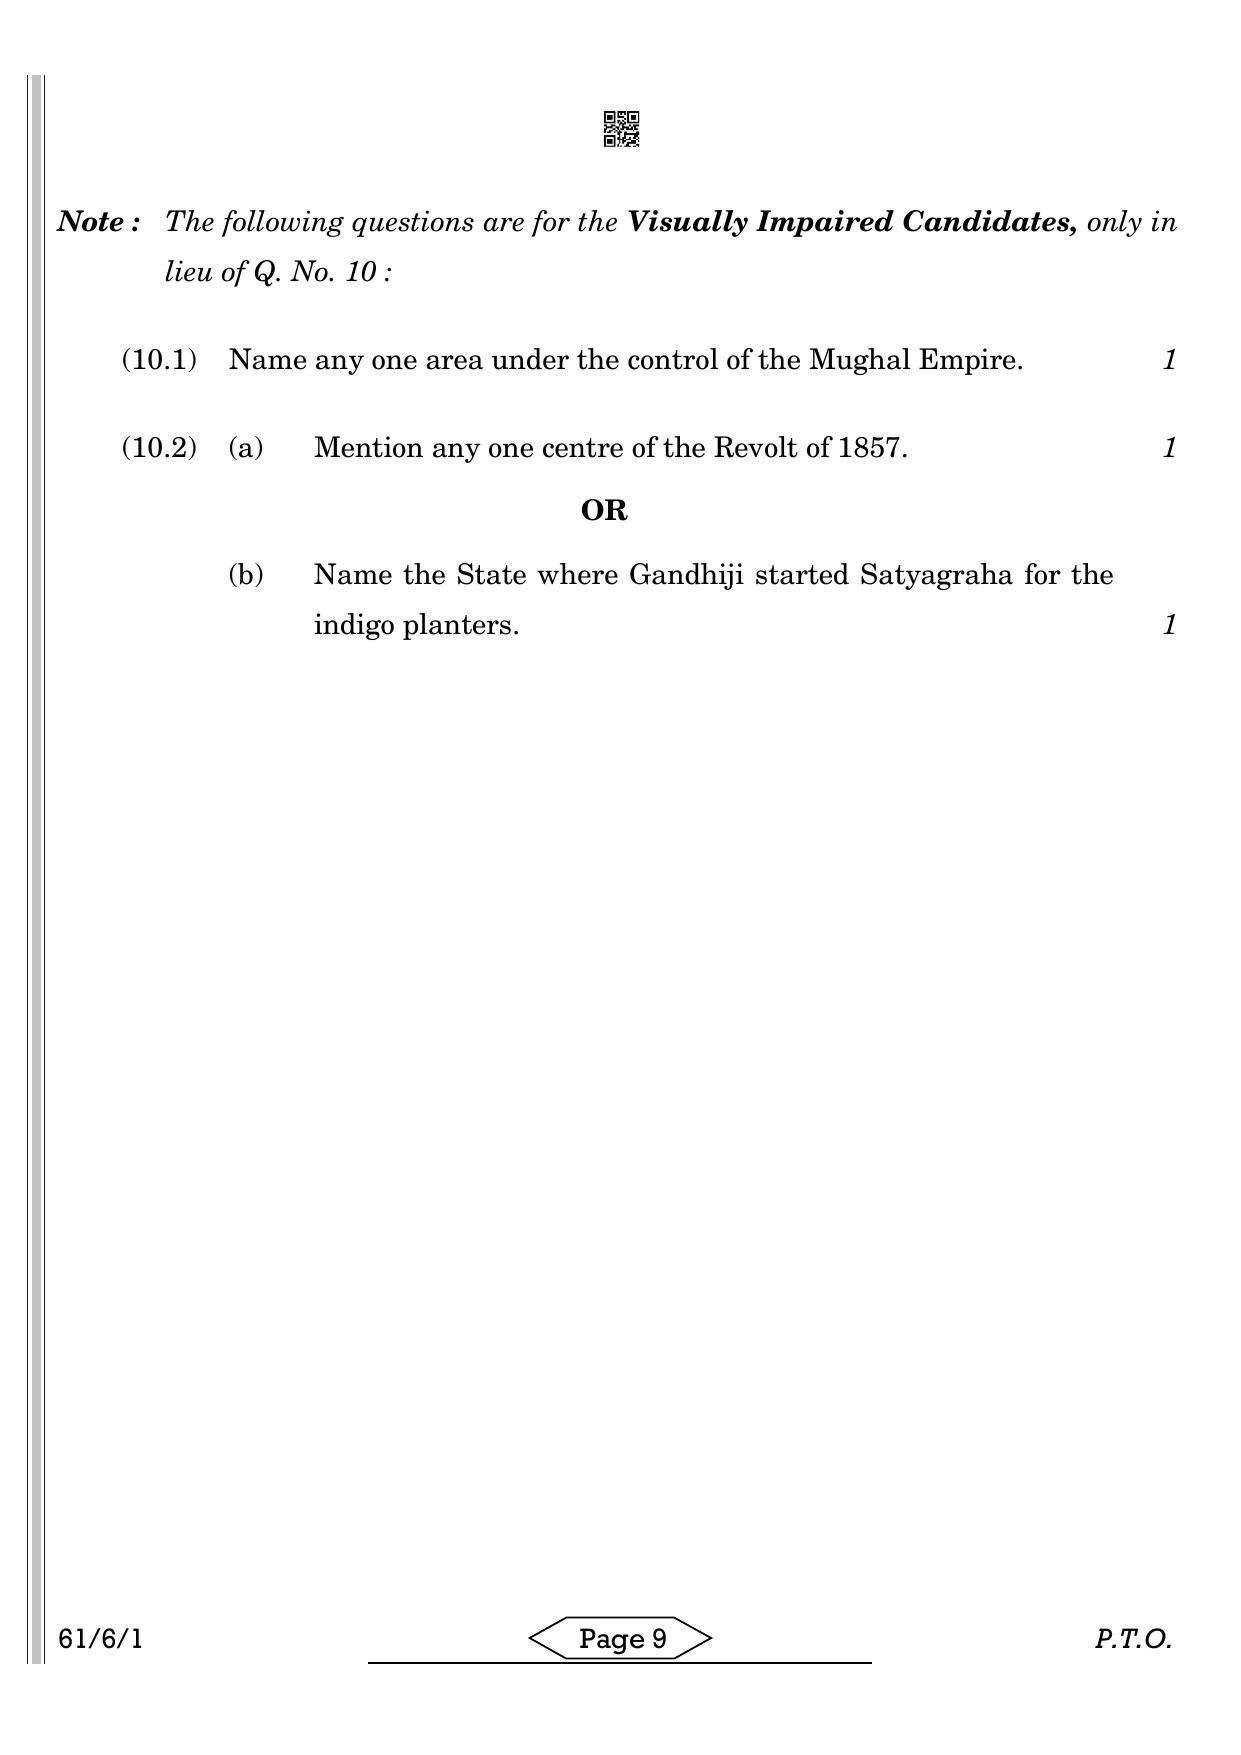 CBSE Class 12 61-6-1 HISTORY 2022 Compartment Question Paper - Page 9